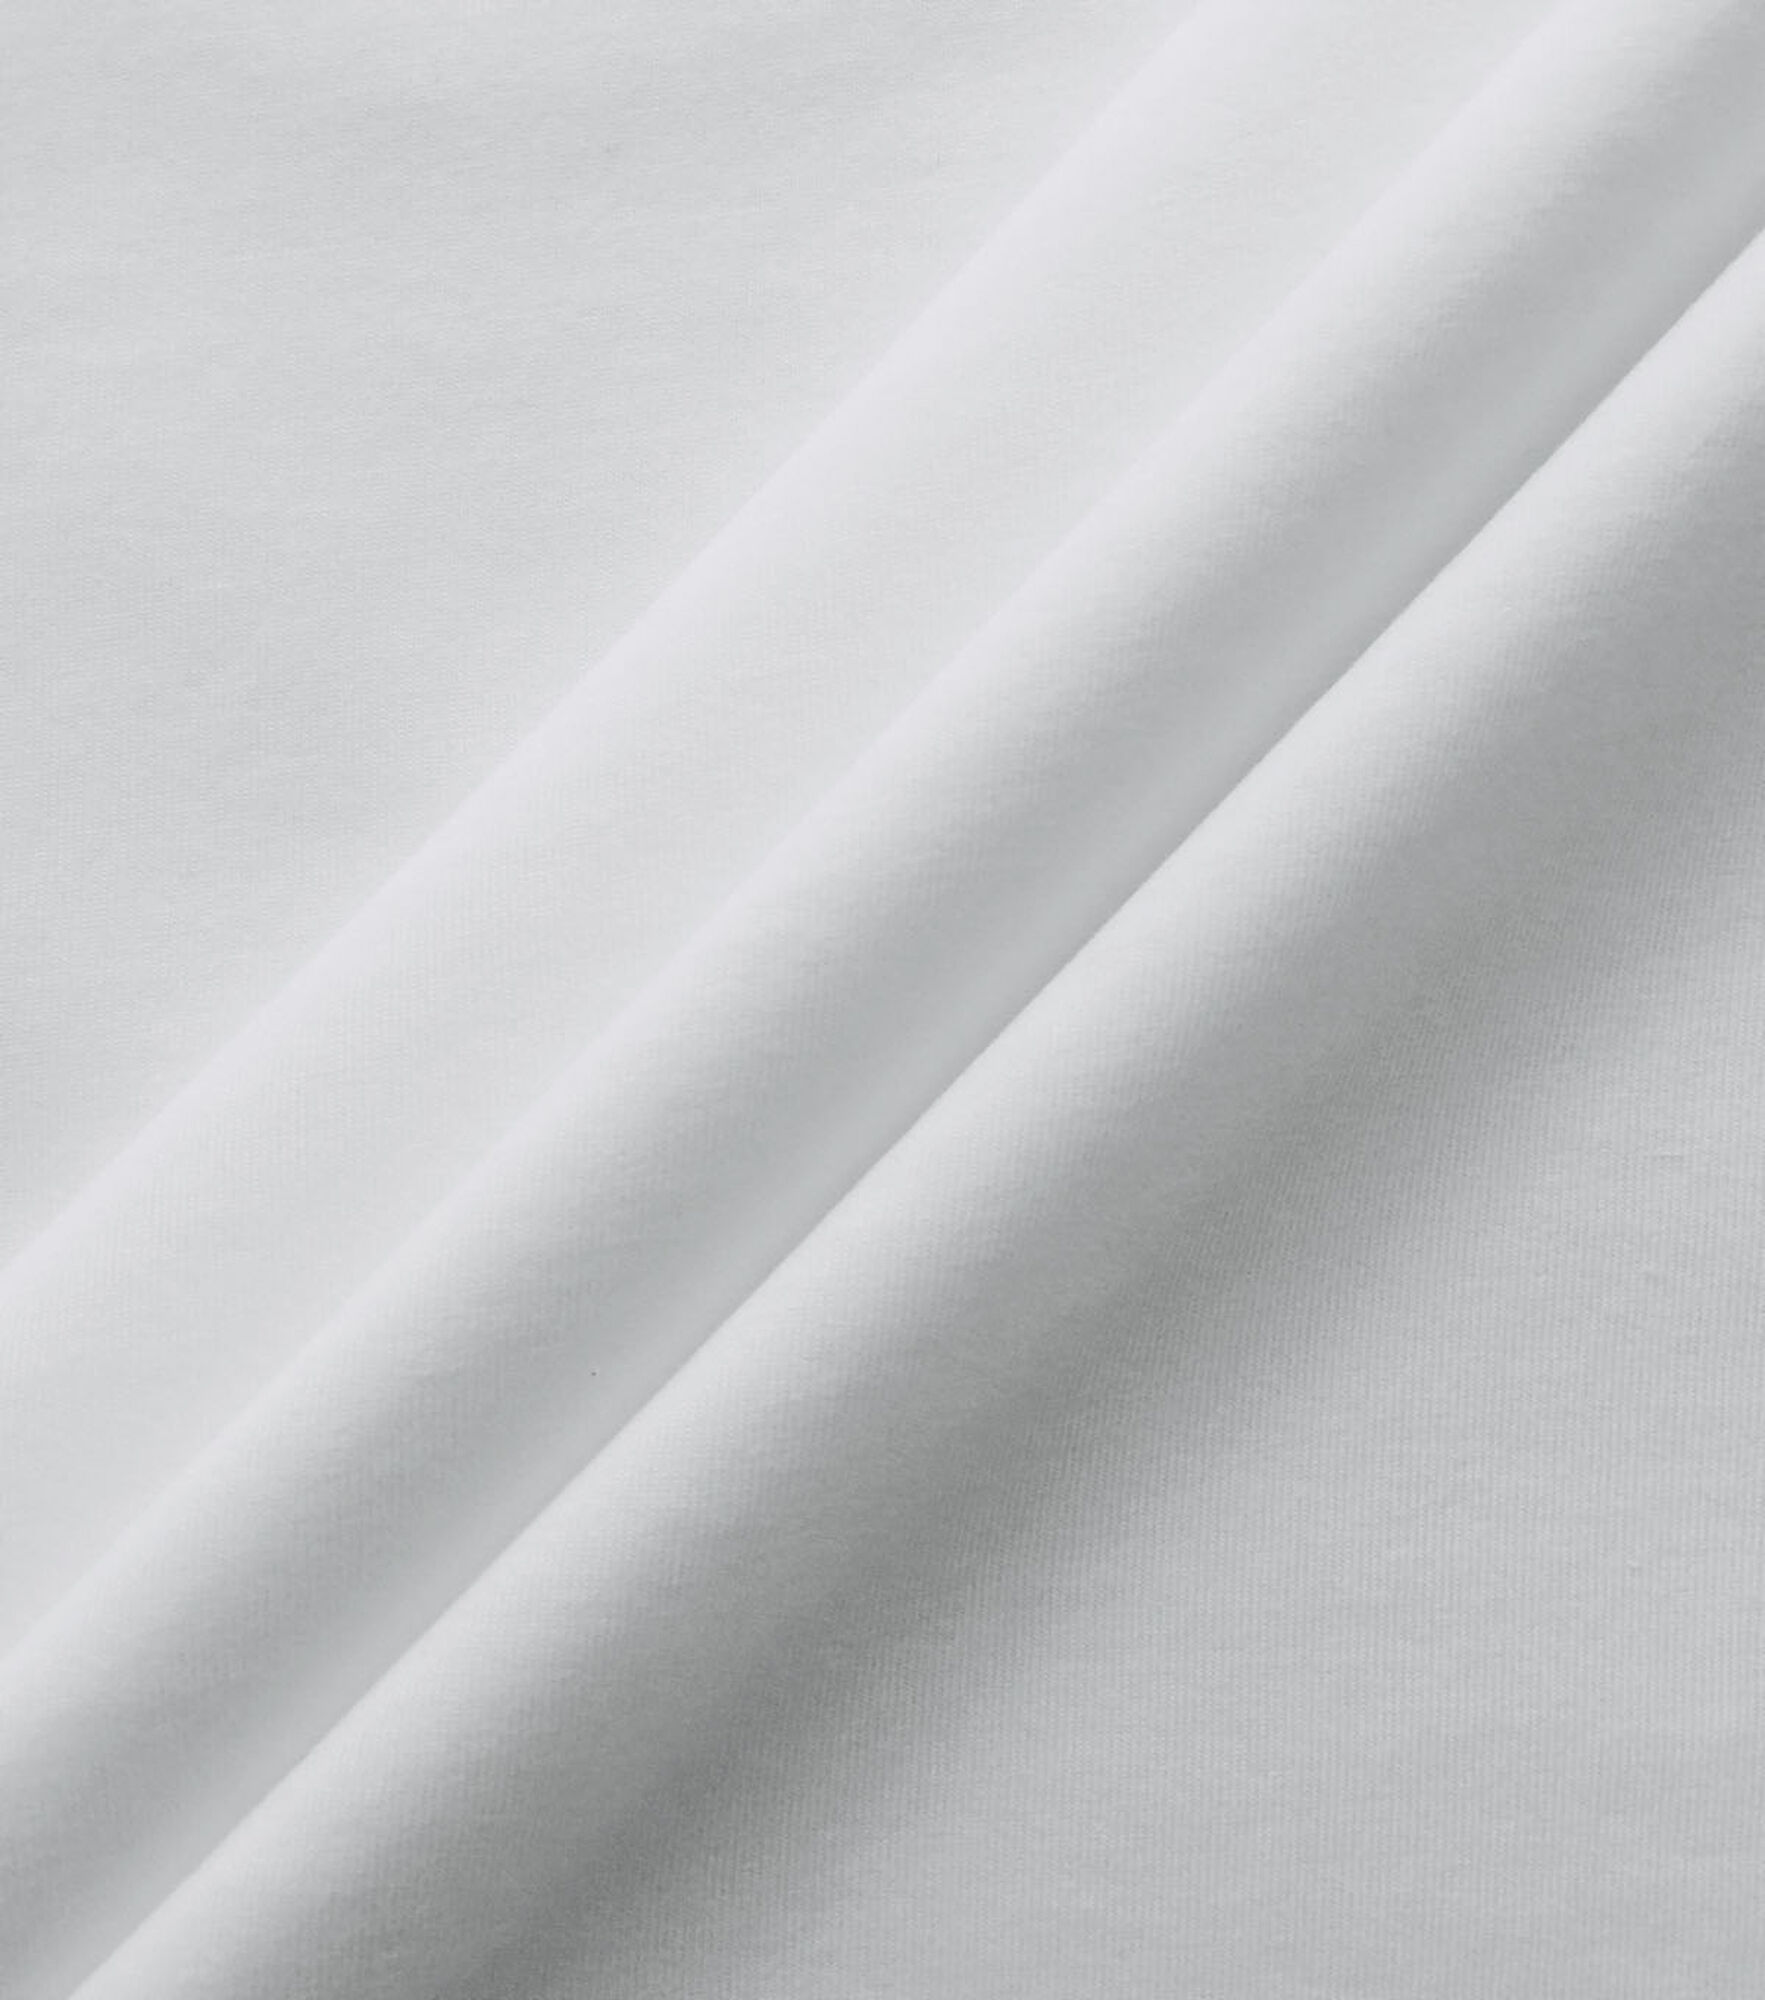 Brilliant White Solid Jersey Knit Fabric by POP!